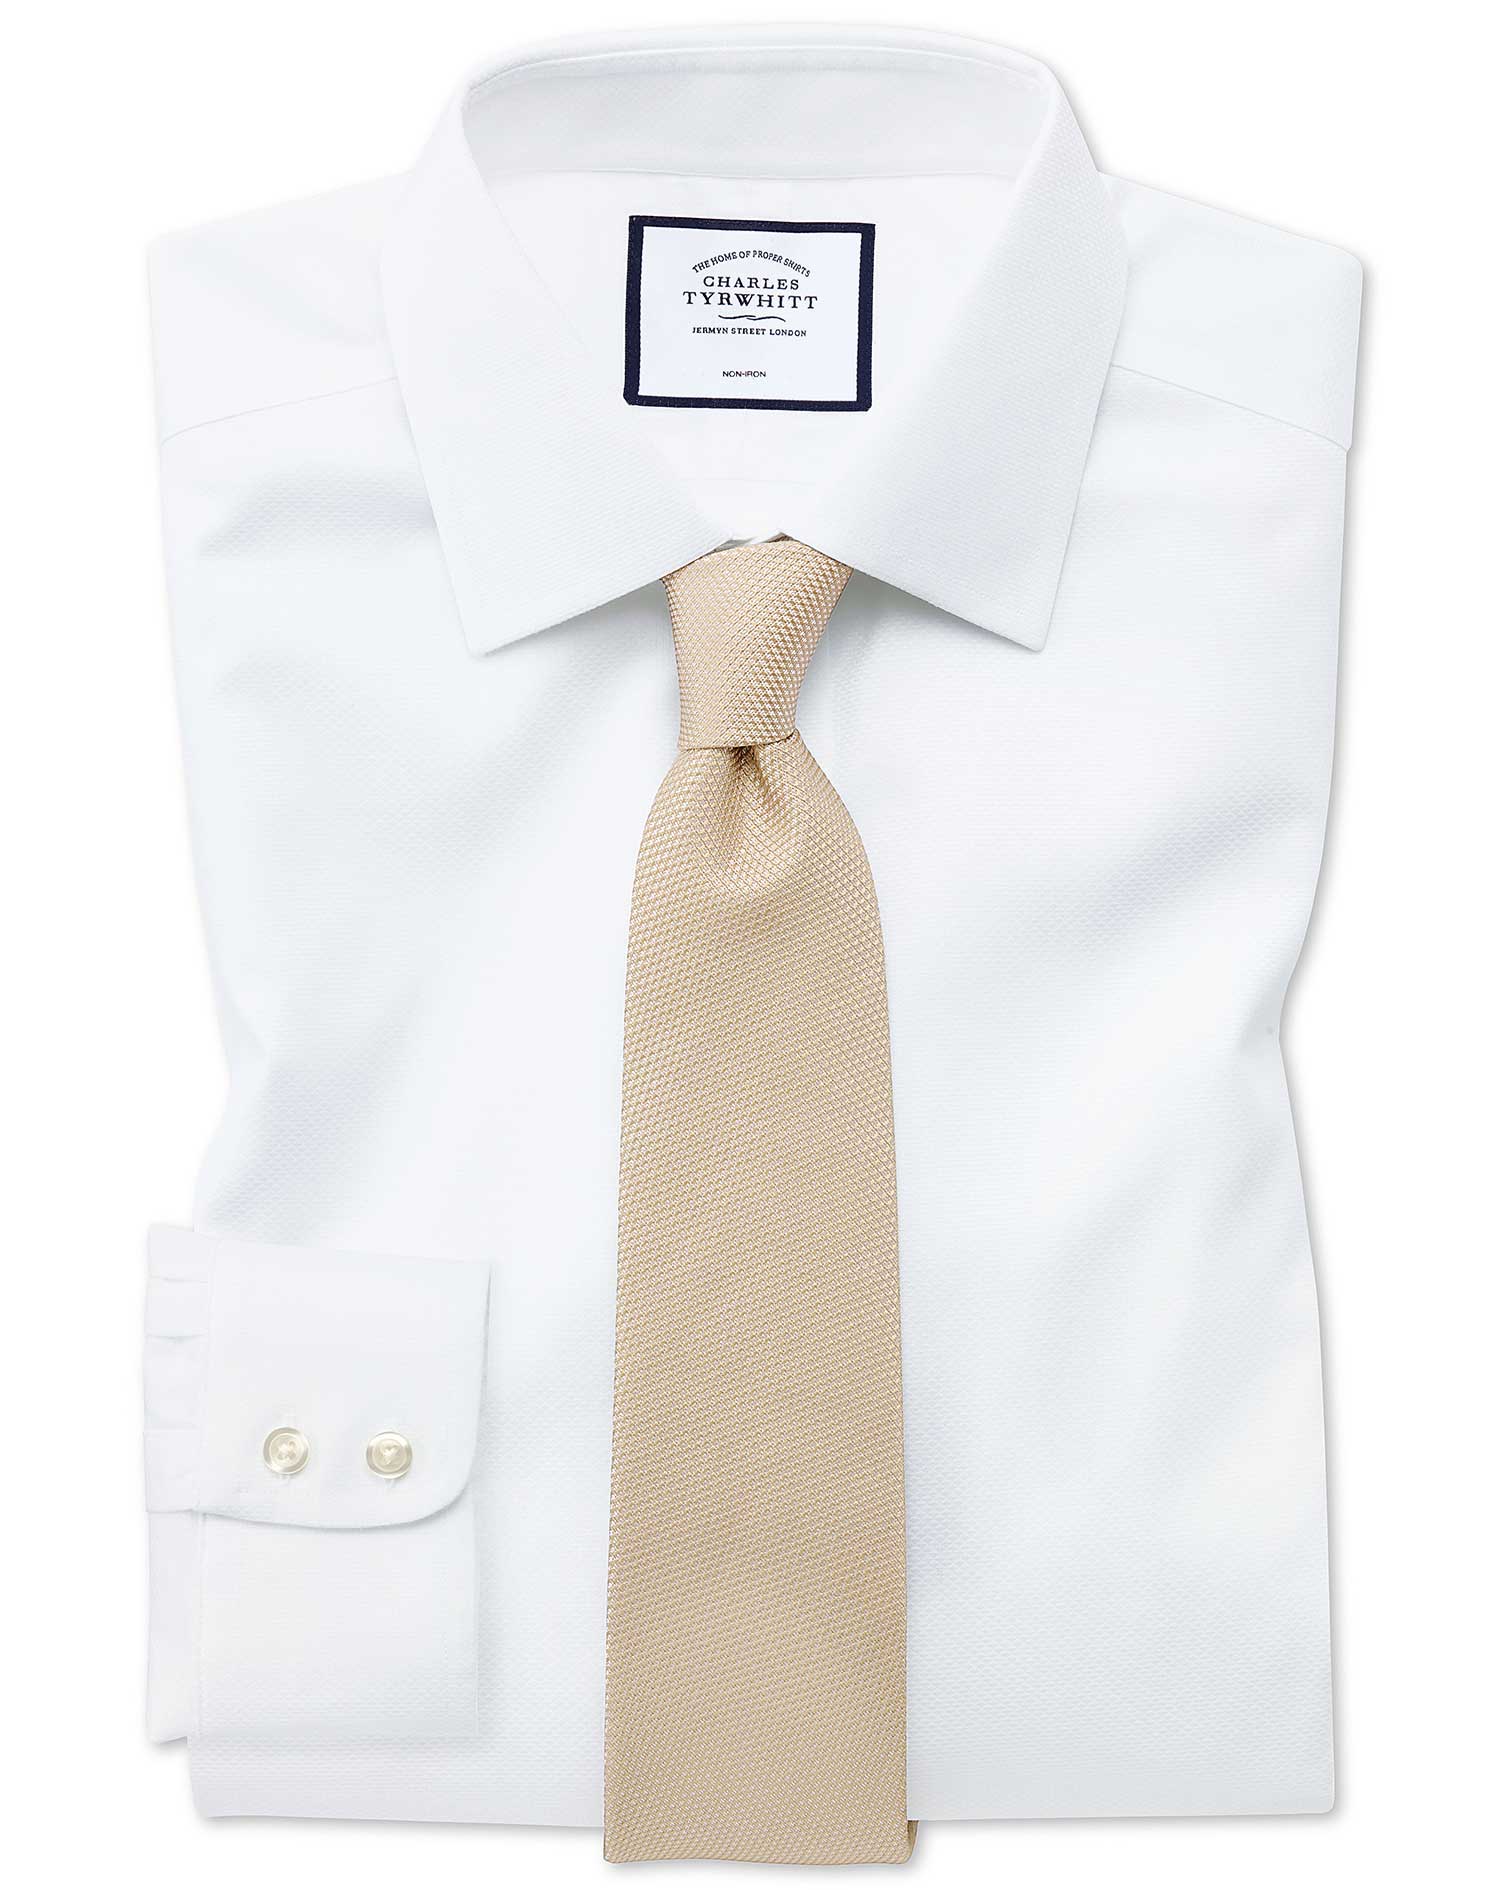 Non-Iron Triangle Weave Cotton Business Shirt - White Single Cuff Size 42/89 by Charles Tyrwhitt